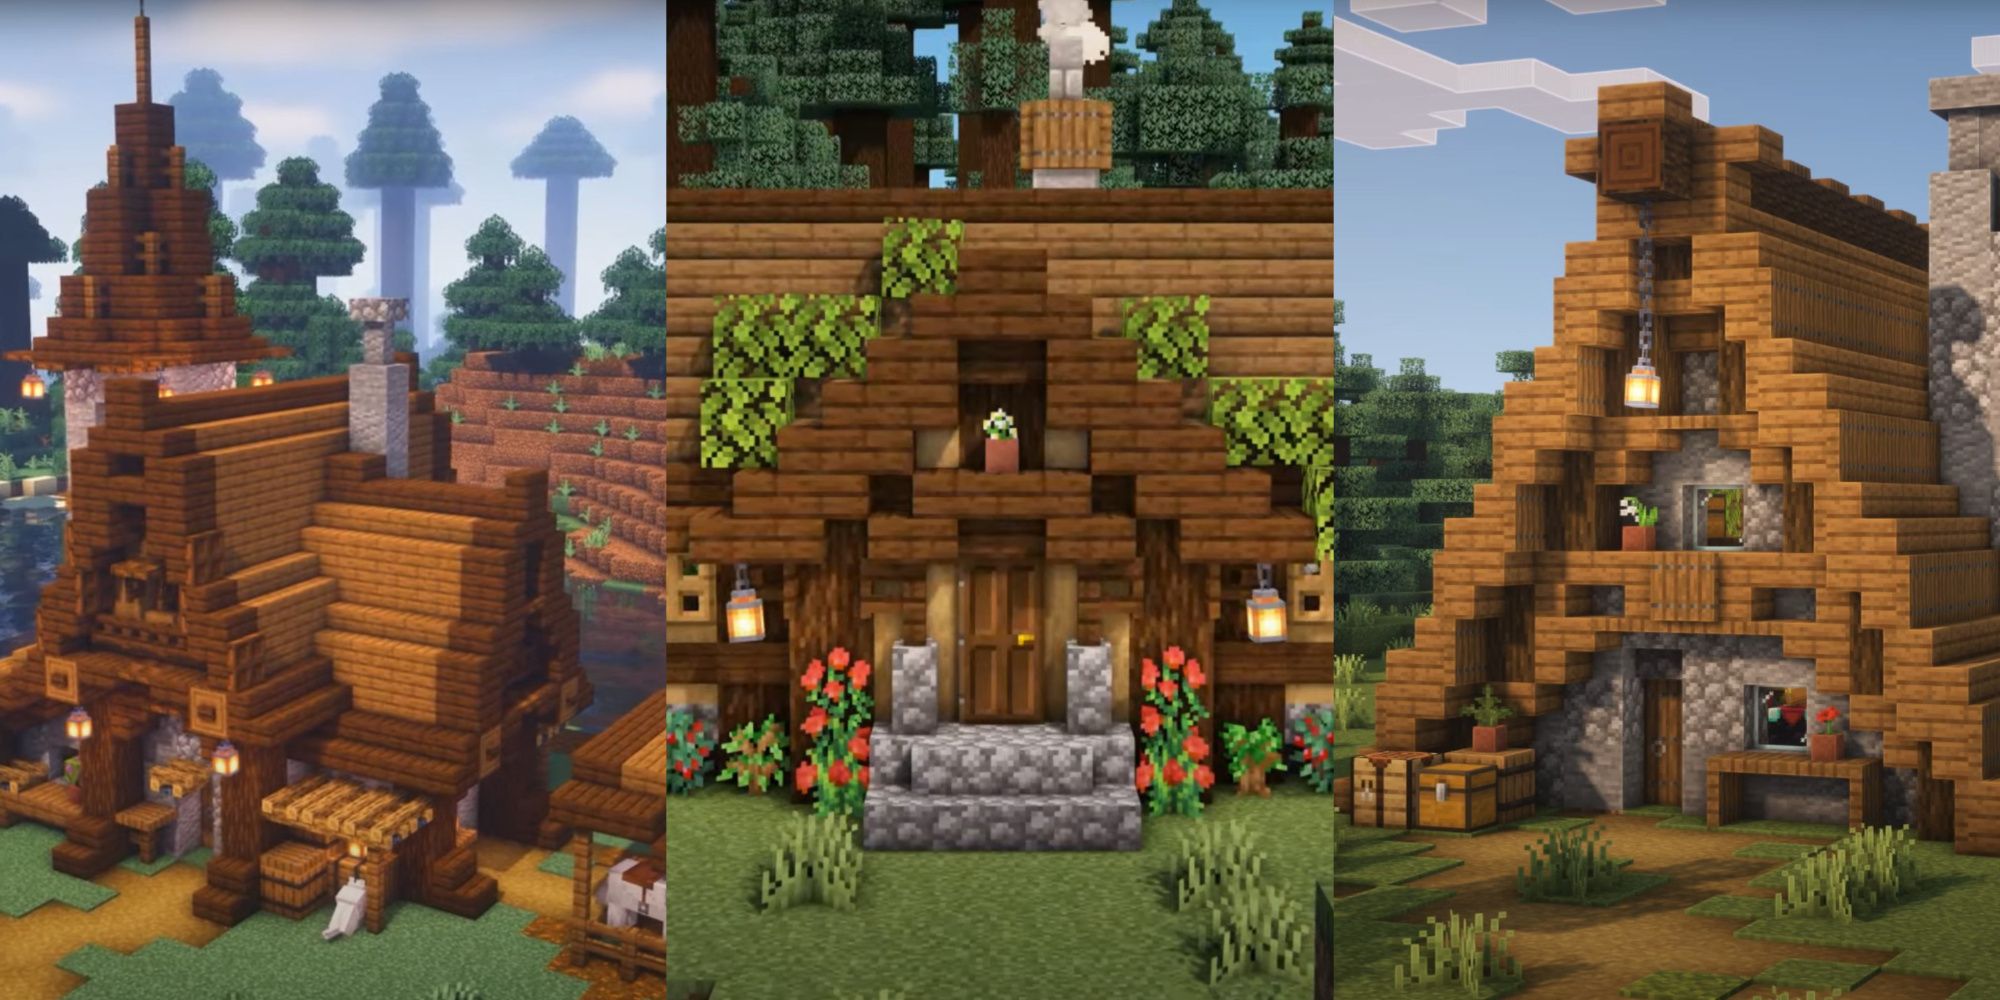 Build you a house to start a world in minecraft survival by